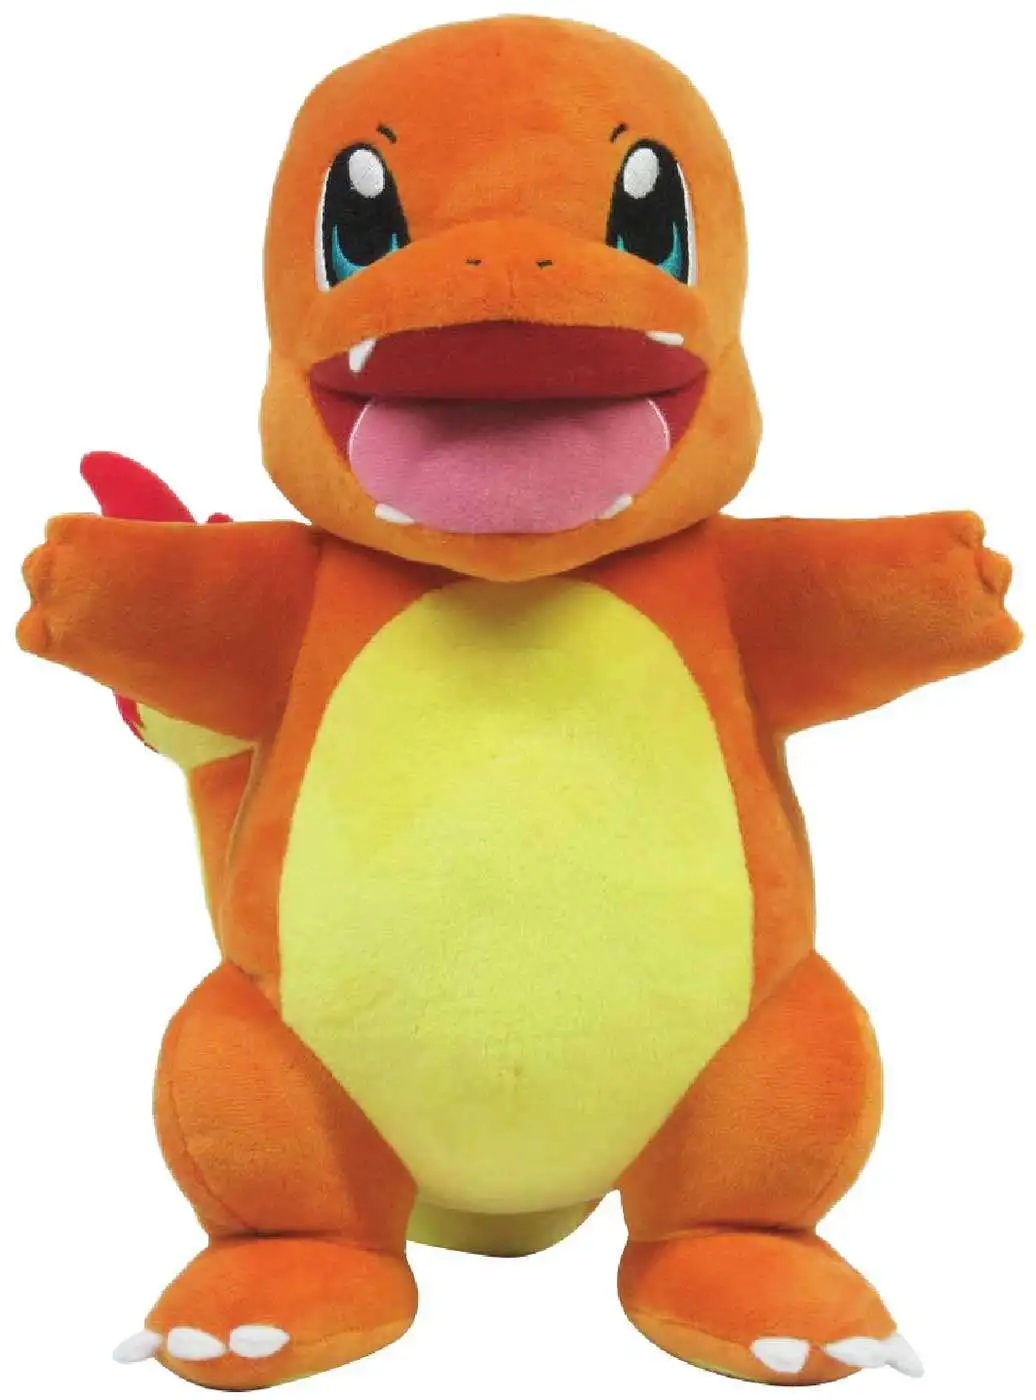 Lights and Sounds Charmander! New Pokémon Feature Interactive 10" Plush Doll 